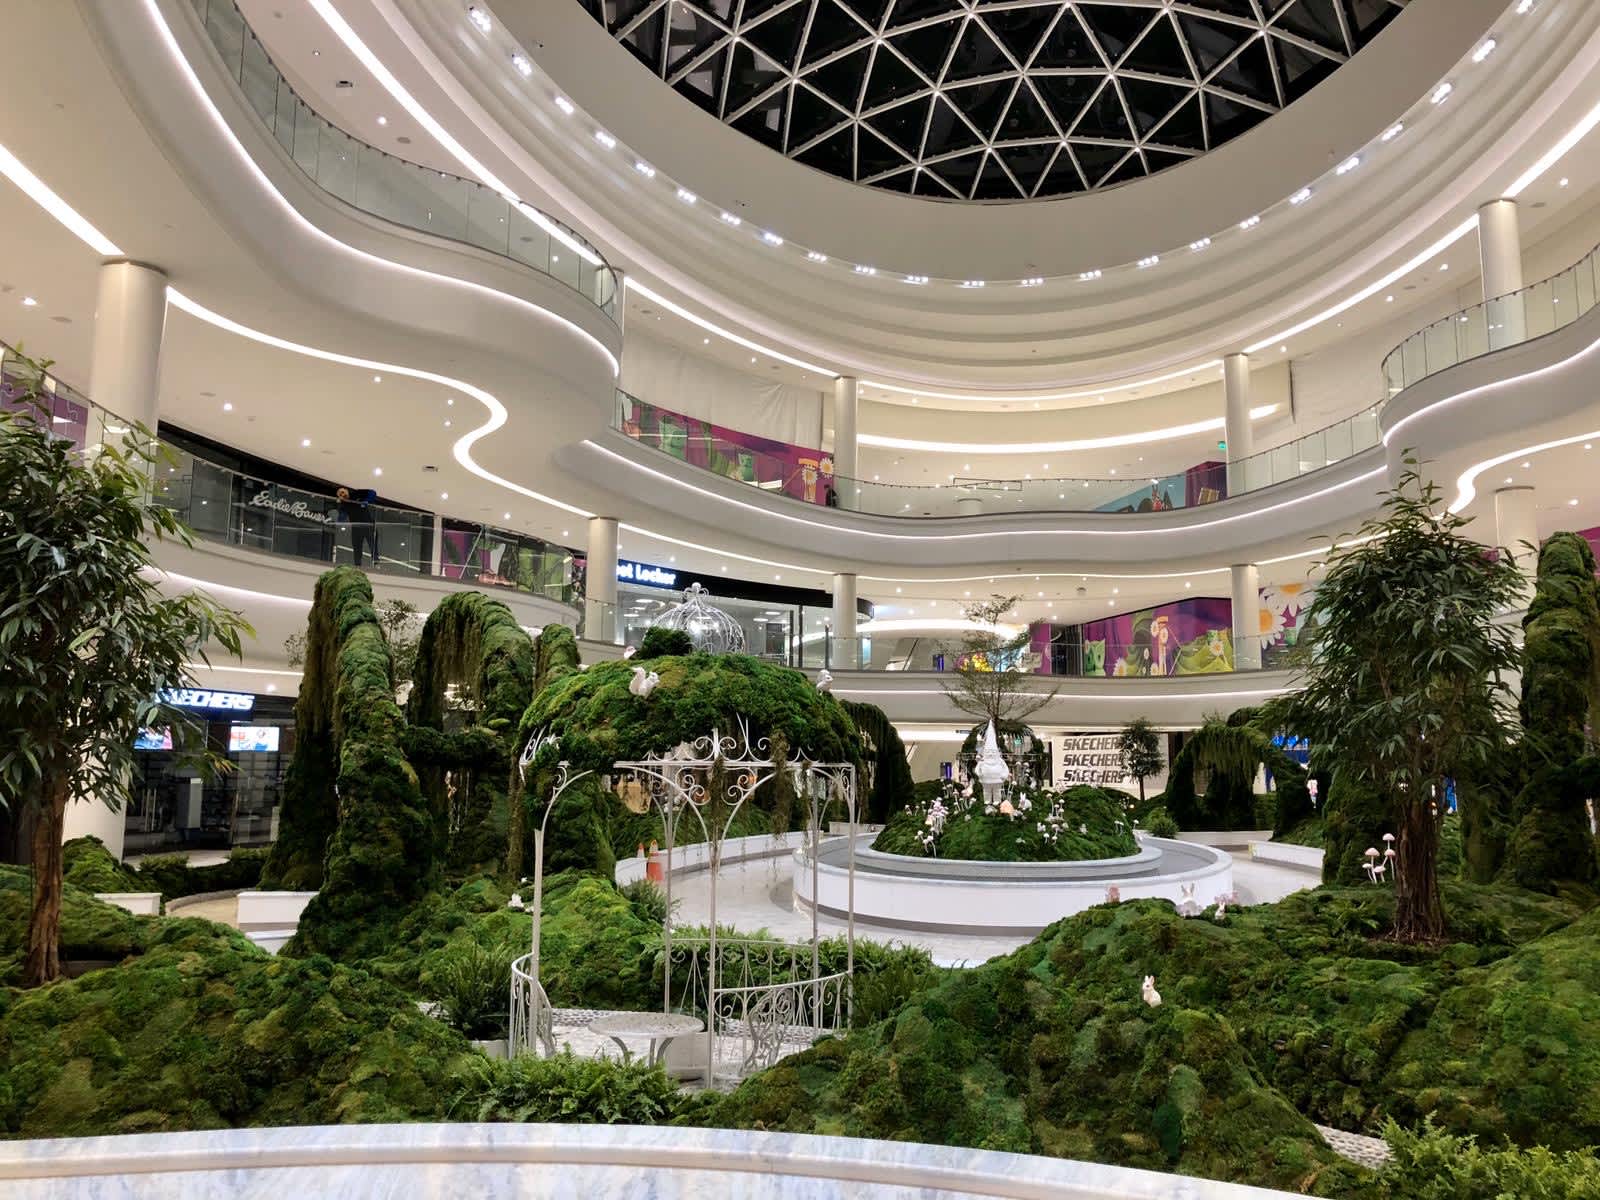 Photos: Inside New Jersey's American Dream mall, as it reopens